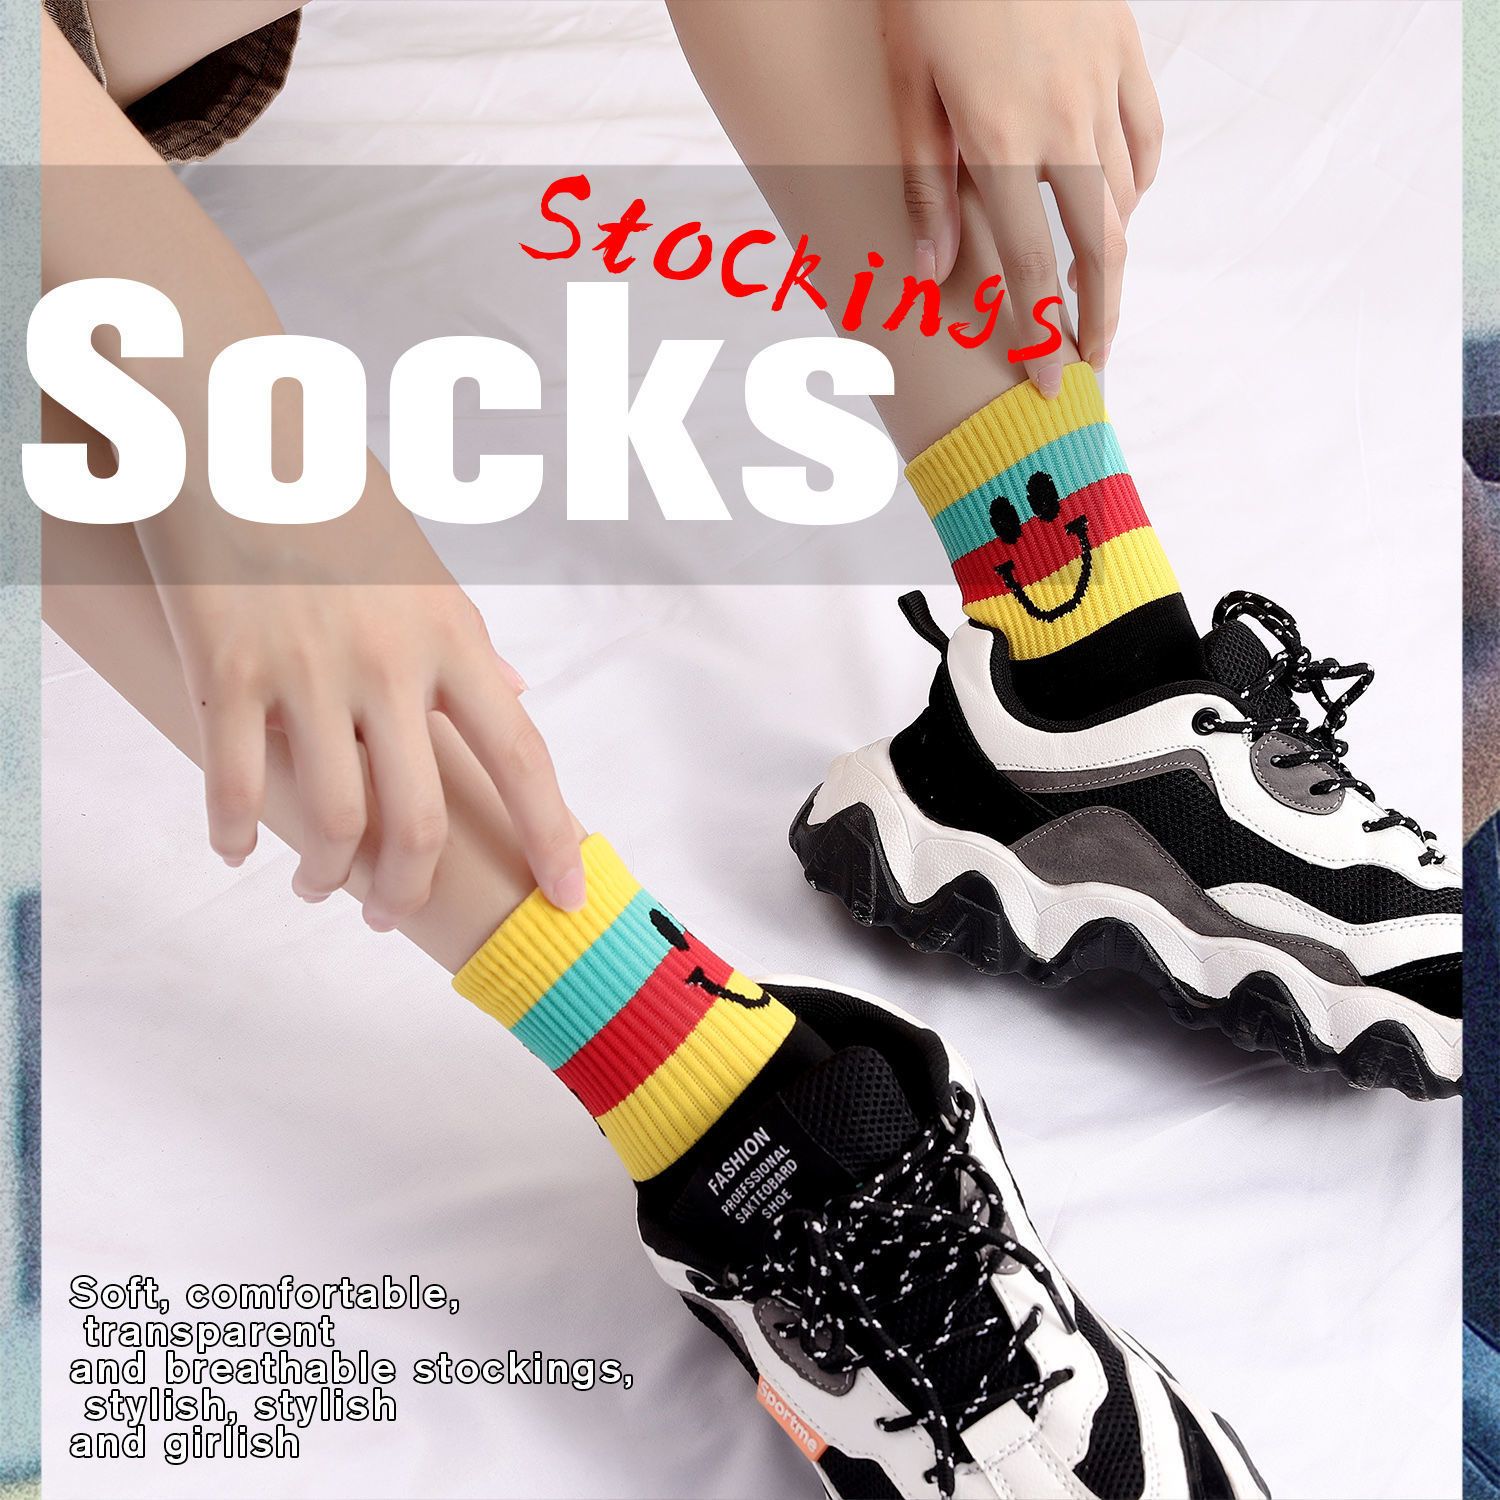 Rainbow Socks for Women Ins Fashionable All-Matching Internet Celebrity Colorful Stripe College Style Adult Autumn and Winter Cotton Mid-Calf Socks